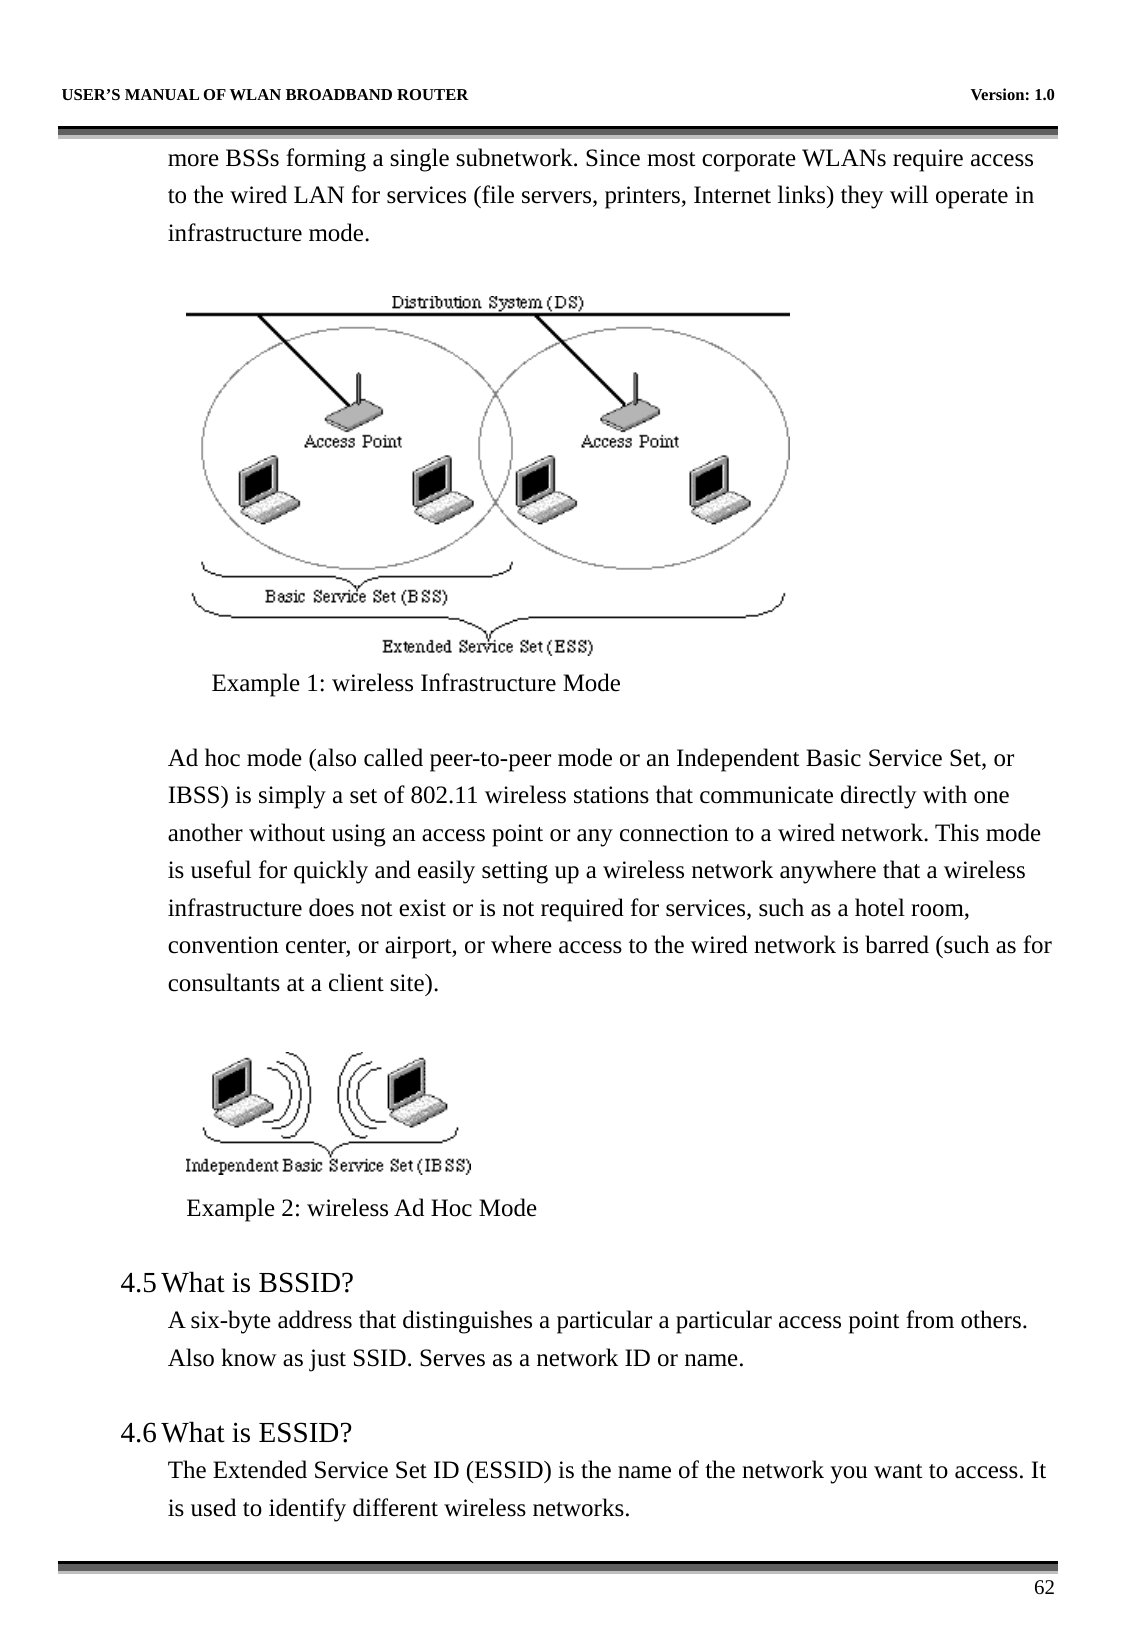   USER’S MANUAL OF WLAN BROADBAND ROUTER    Version: 1.0      62 more BSSs forming a single subnetwork. Since most corporate WLANs require access to the wired LAN for services (file servers, printers, Internet links) they will operate in infrastructure mode.     Example 1: wireless Infrastructure Mode  Ad hoc mode (also called peer-to-peer mode or an Independent Basic Service Set, or IBSS) is simply a set of 802.11 wireless stations that communicate directly with one another without using an access point or any connection to a wired network. This mode is useful for quickly and easily setting up a wireless network anywhere that a wireless infrastructure does not exist or is not required for services, such as a hotel room, convention center, or airport, or where access to the wired network is barred (such as for consultants at a client site).     Example 2: wireless Ad Hoc Mode  4.5 What is BSSID?   A six-byte address that distinguishes a particular a particular access point from others. Also know as just SSID. Serves as a network ID or name.    4.6 What is ESSID?   The Extended Service Set ID (ESSID) is the name of the network you want to access. It is used to identify different wireless networks.   